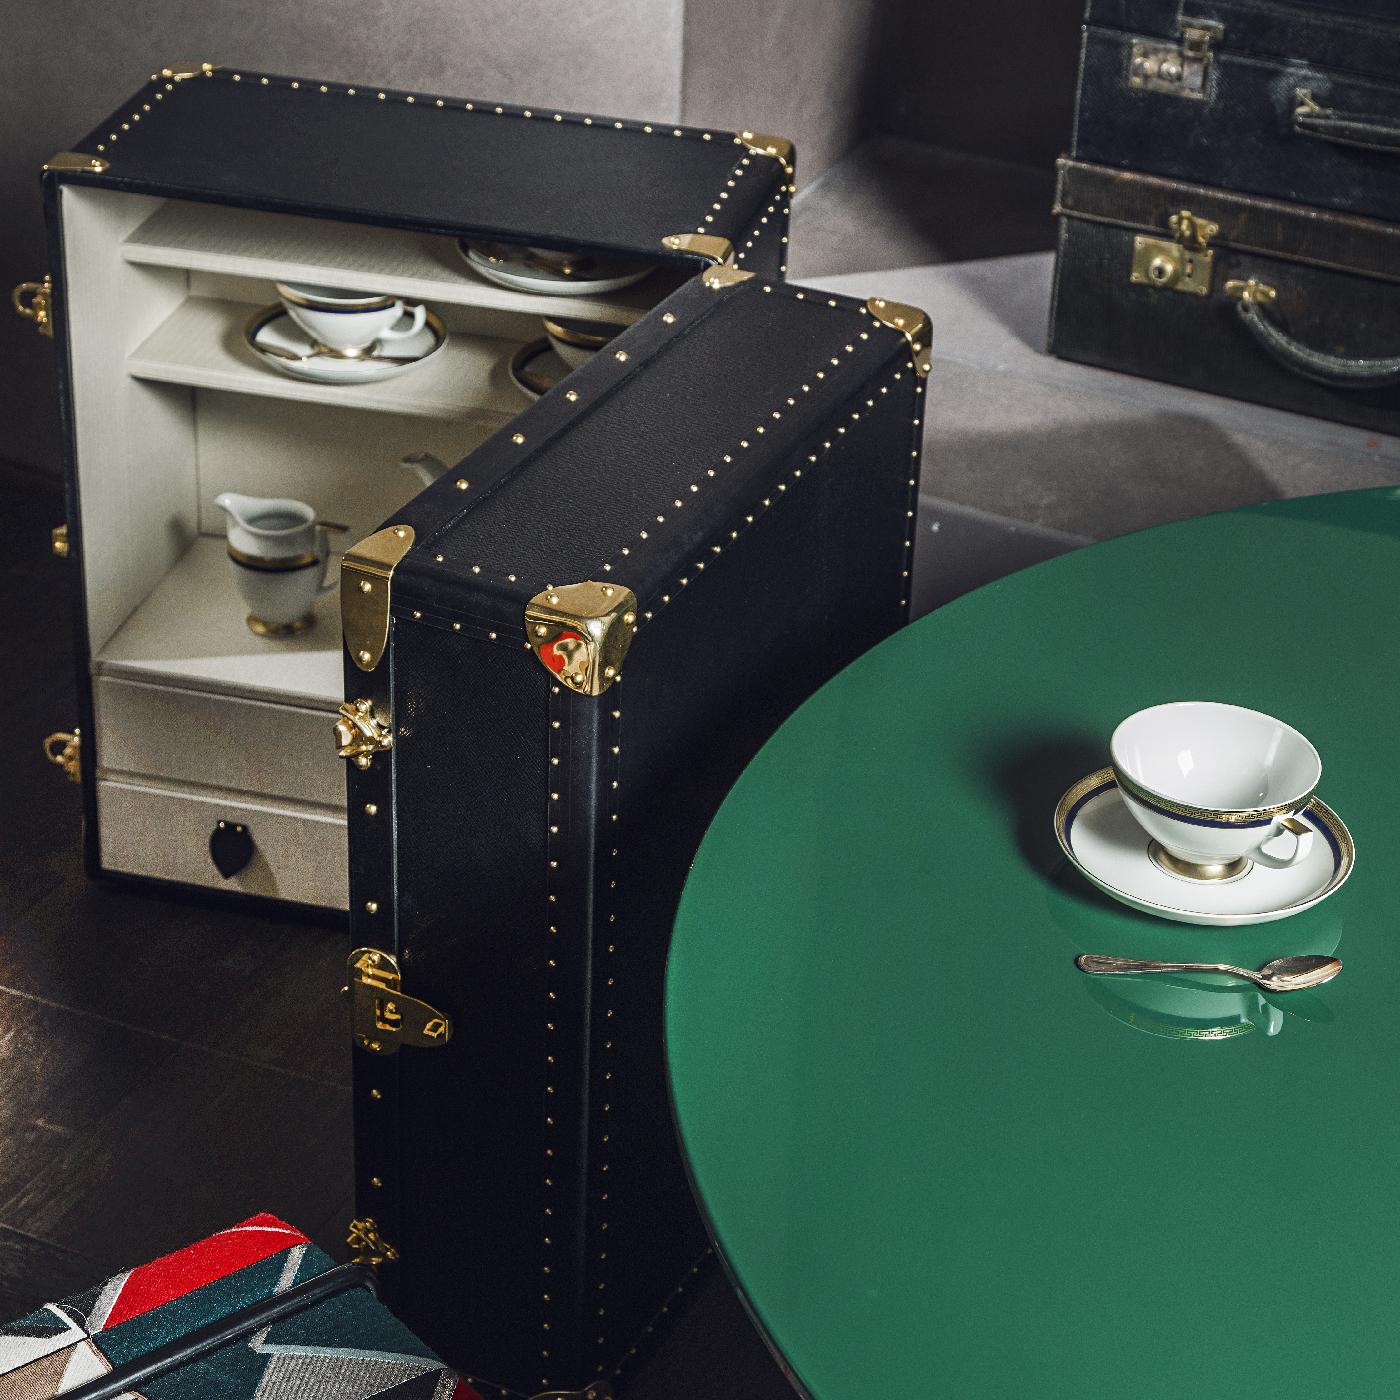 Retro-chic allure and exquisite attention to detail are the distinctive traits of this vinyl trunk that provides storage and display space for precious Lps, while also offering high-end technology with the Technics SL-1210GR direct-drive turntable